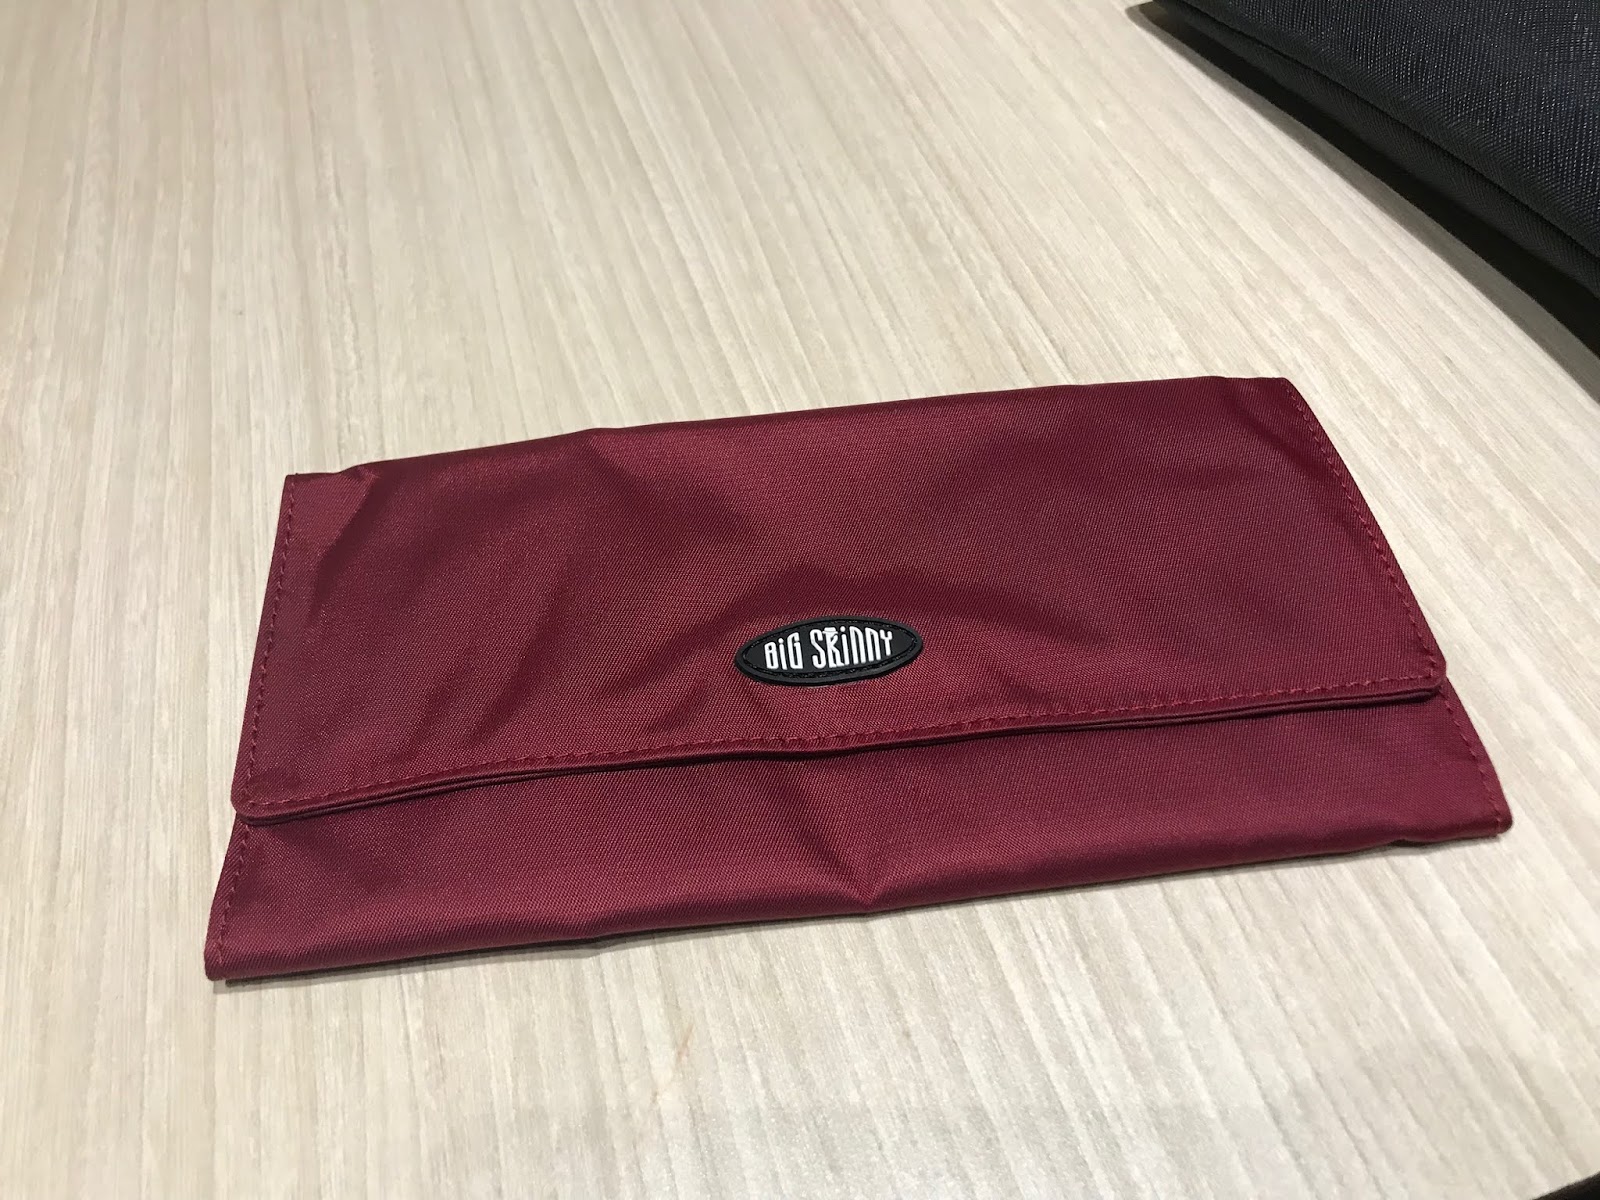 [Review] Big Skinny Monte Cougar Red Women's Wallet - The Blahger